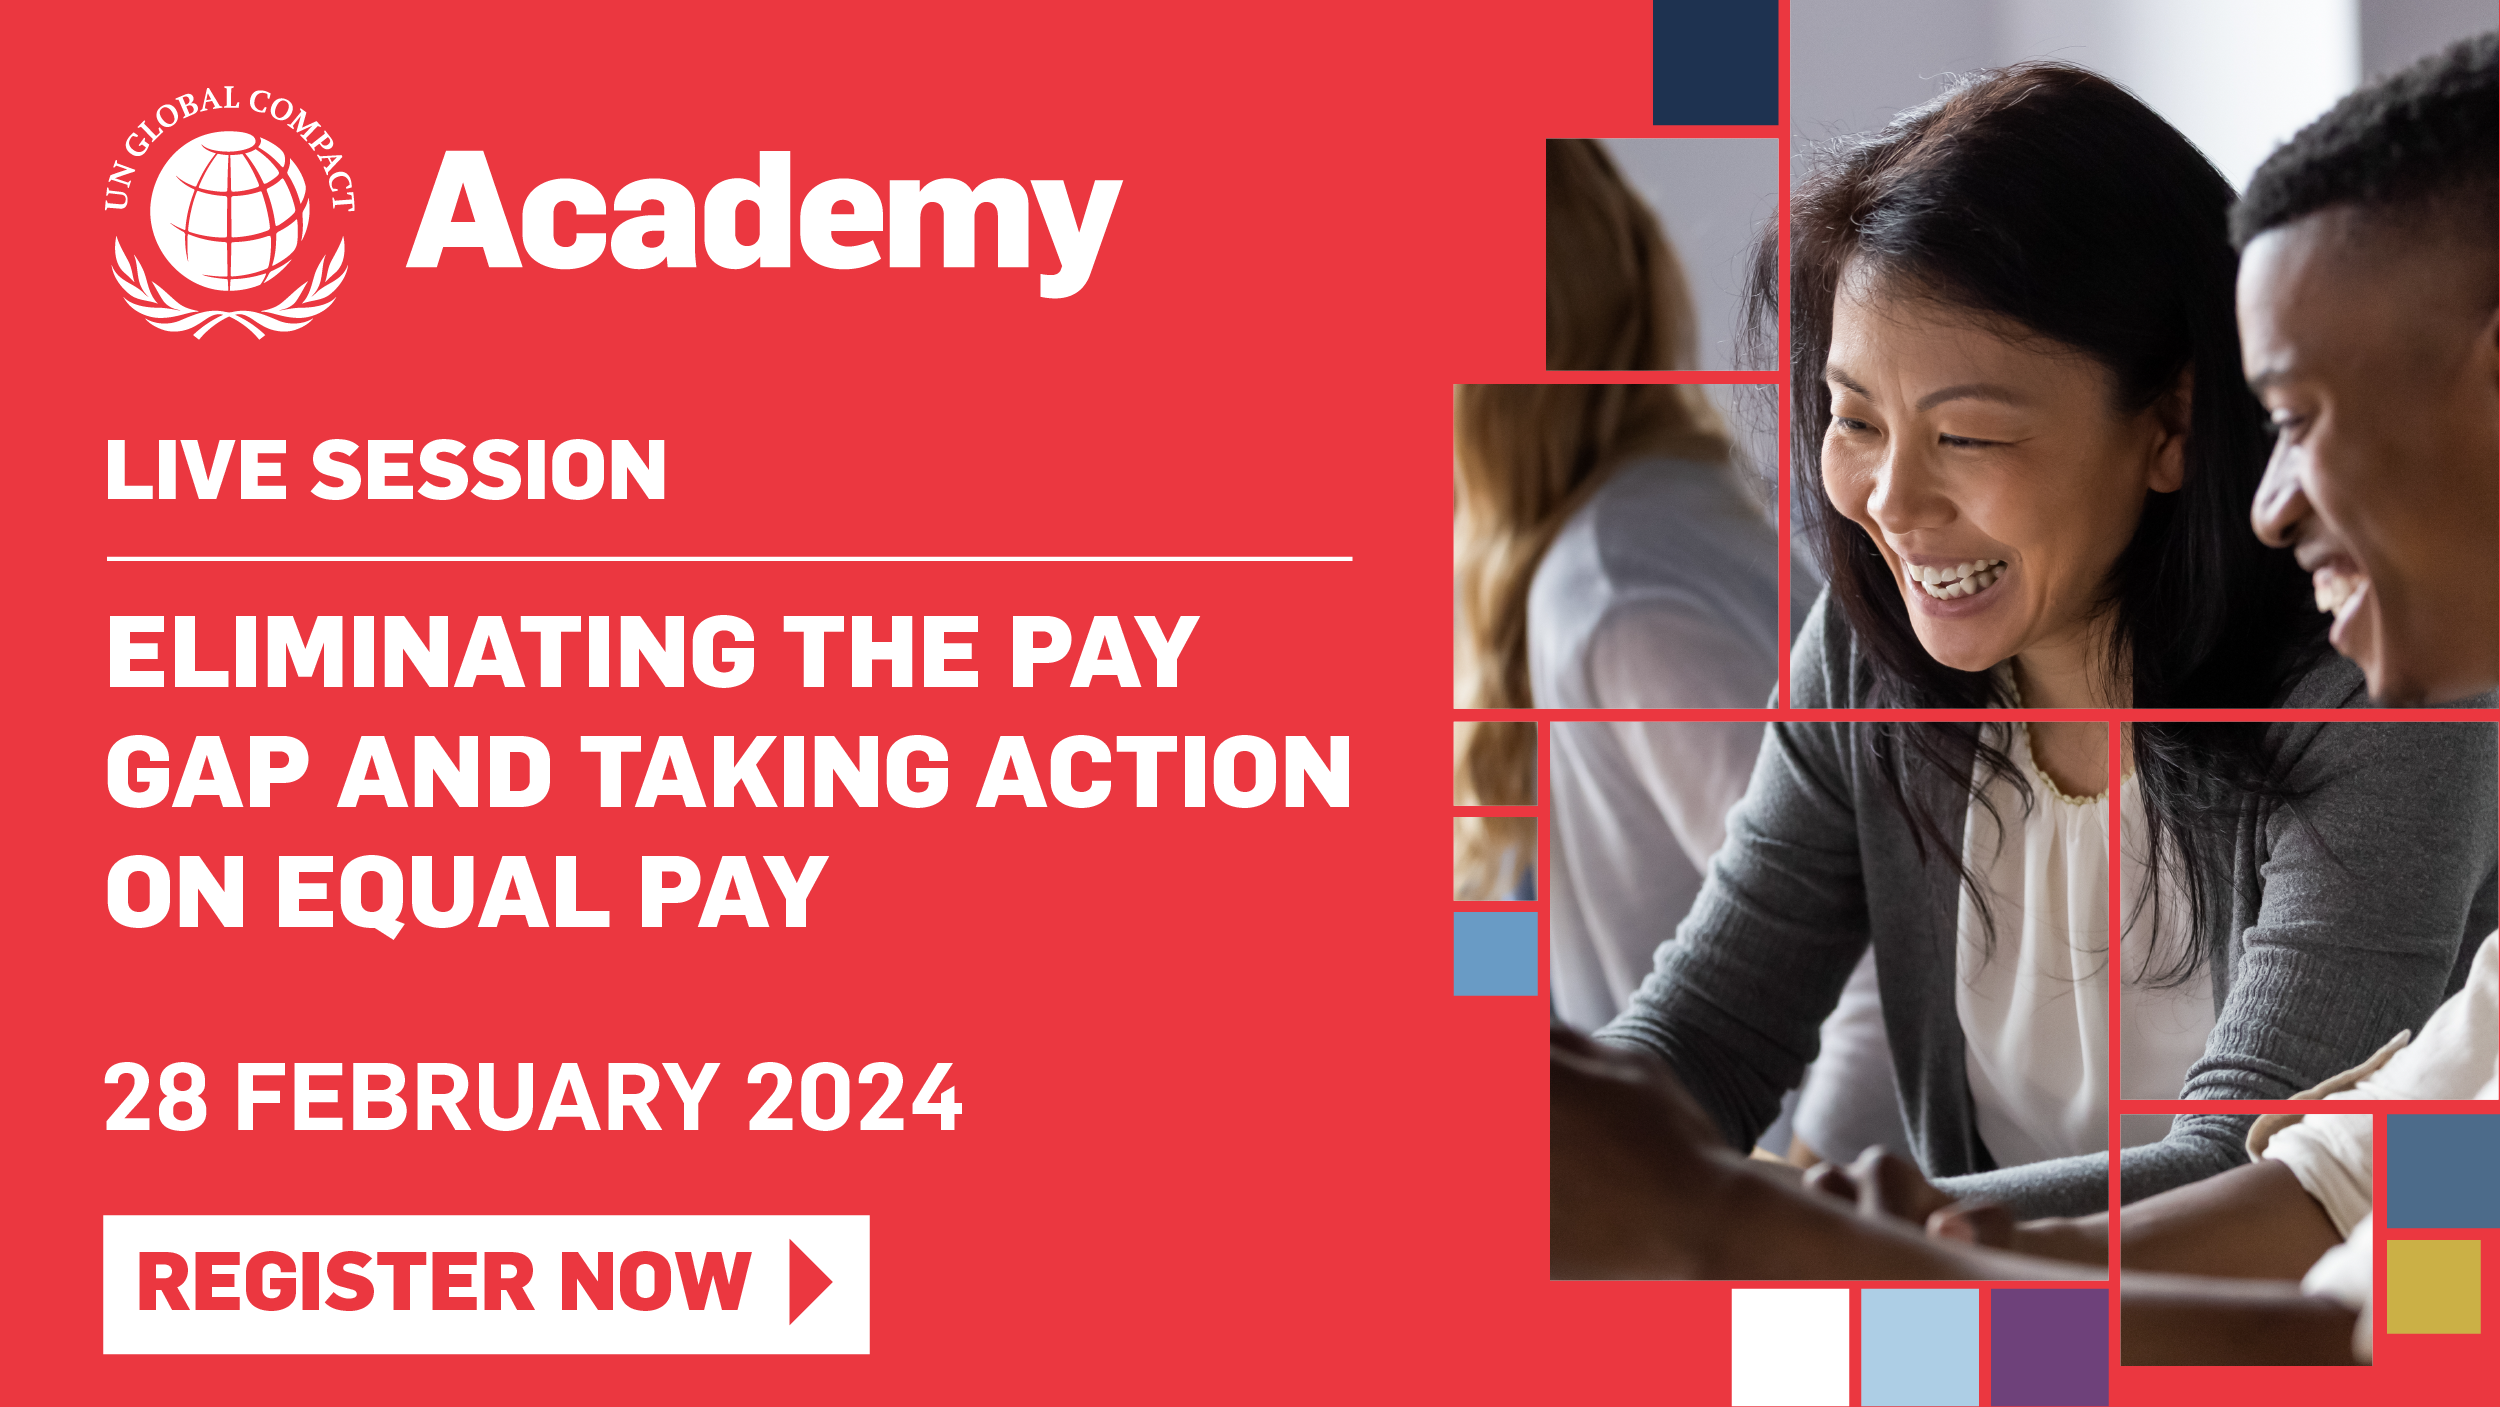 Join this session to learn how to take action on equal pay and eliminating the pay gap.